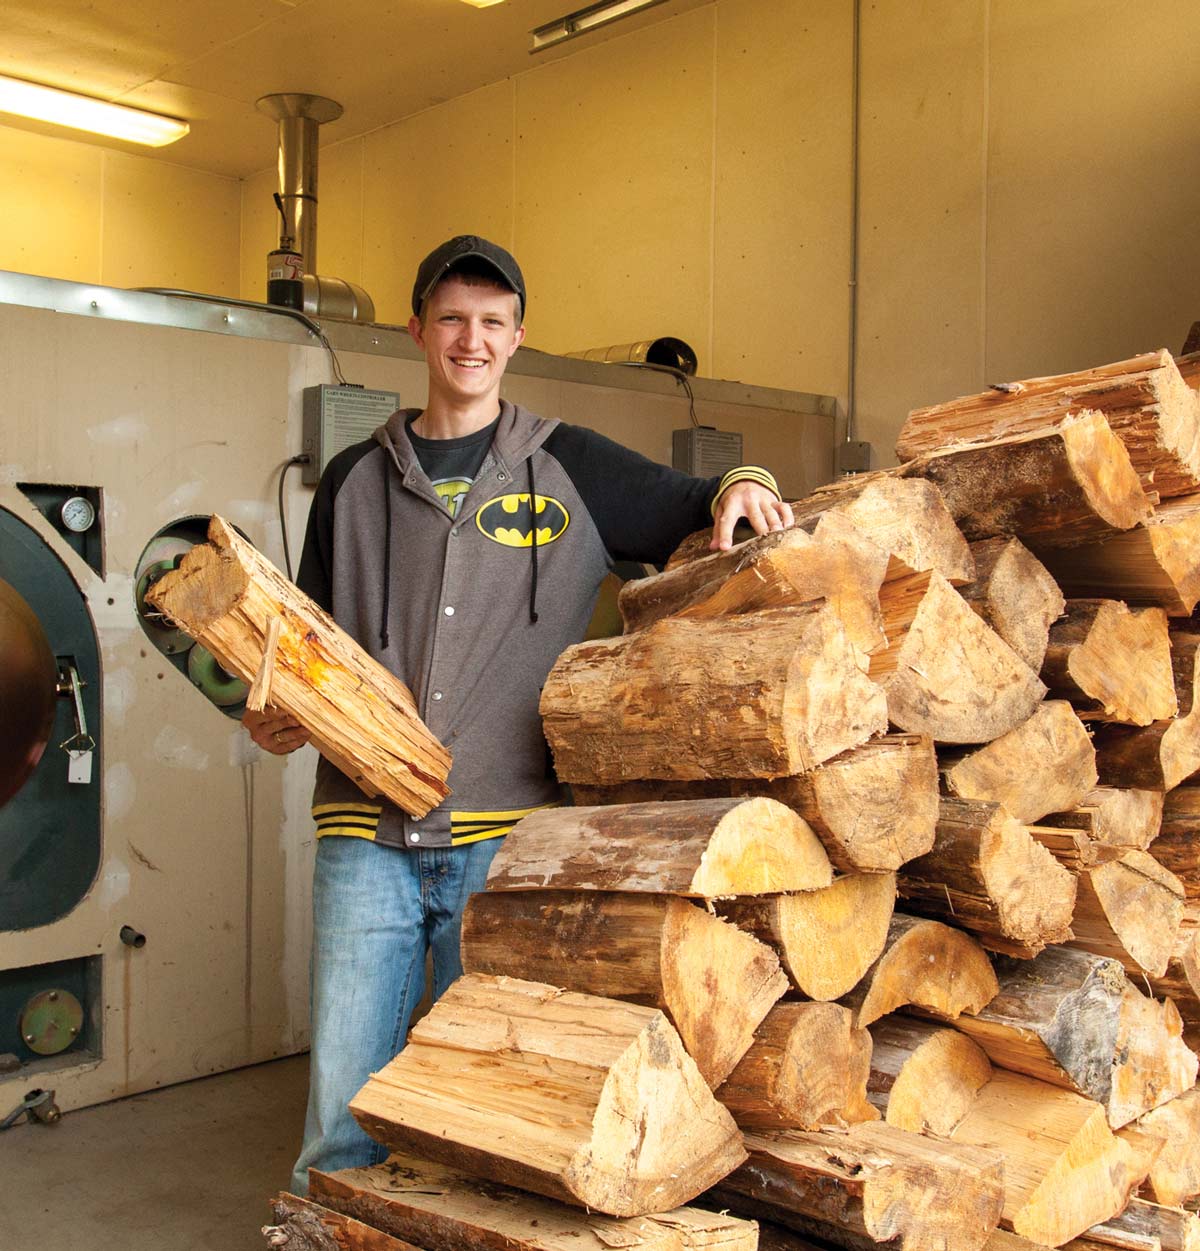 Biomass heating systems provide much-needed heat during Alaska's cold winters.